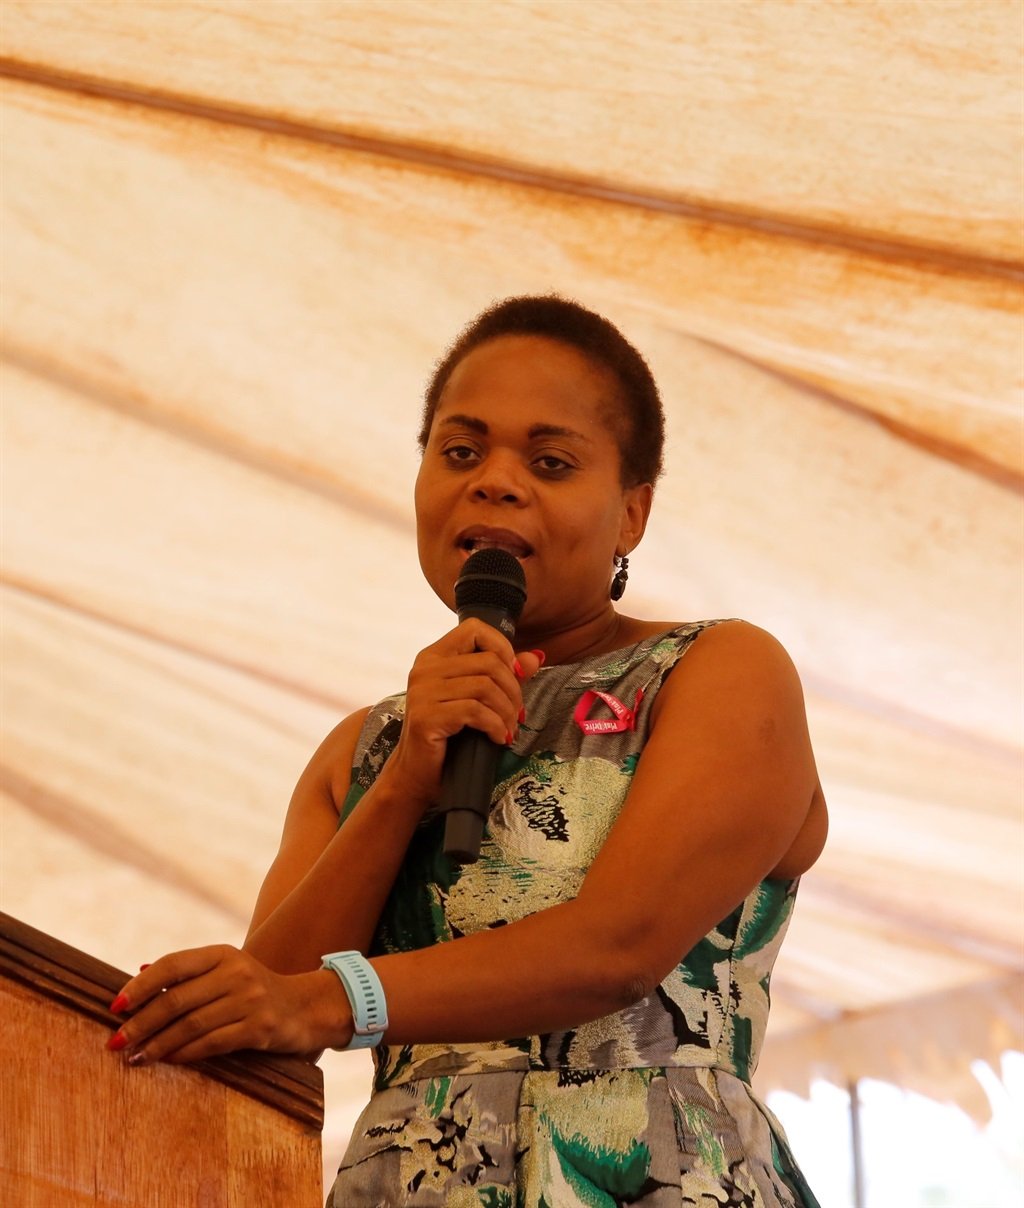 Limpopo Health MEC Dr Phophi Ramathuba, who has issued a stern warning. Photo by Judas Sekwela